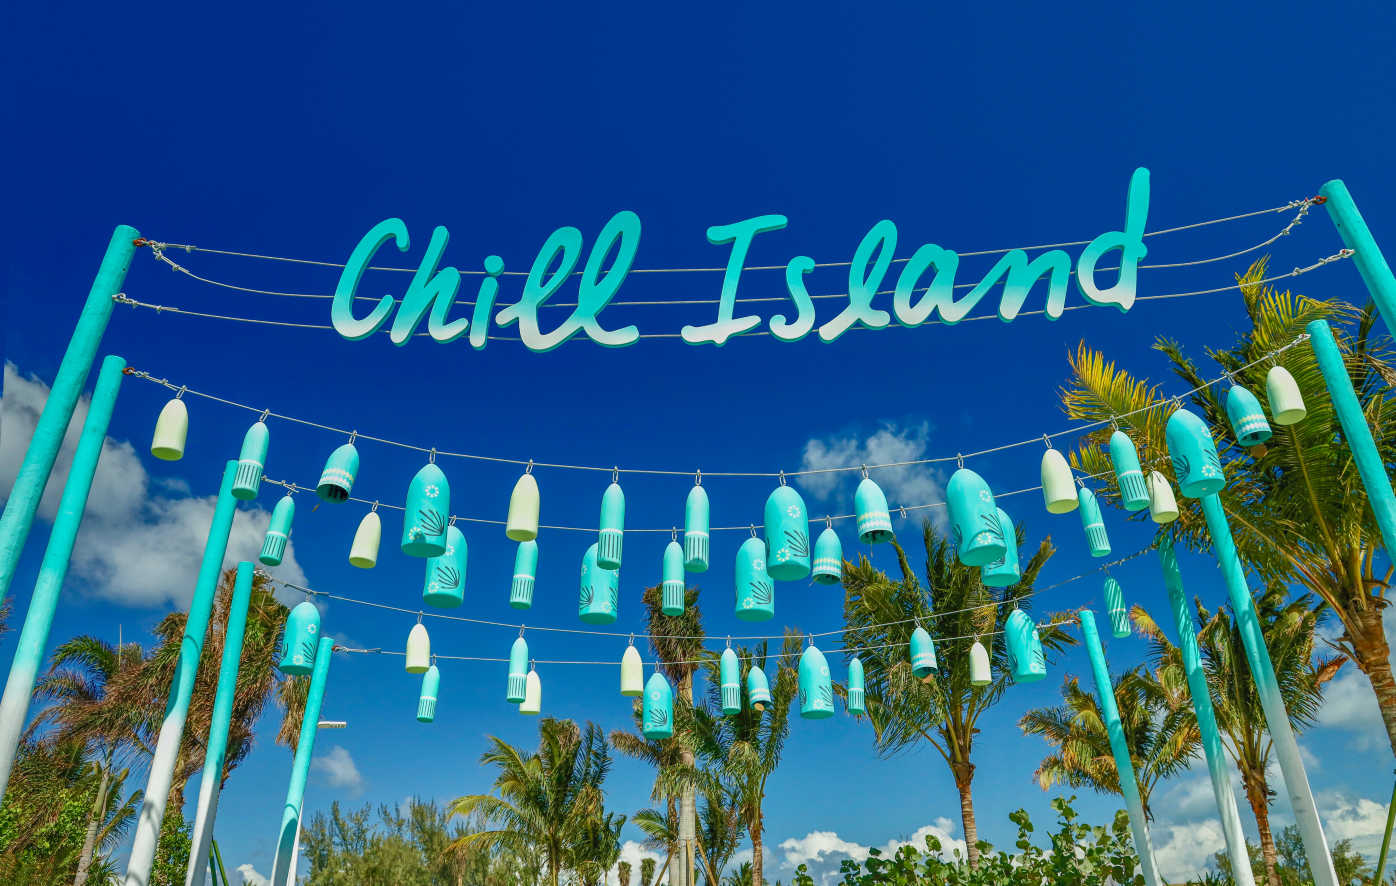 Chill island are the sunbeams free